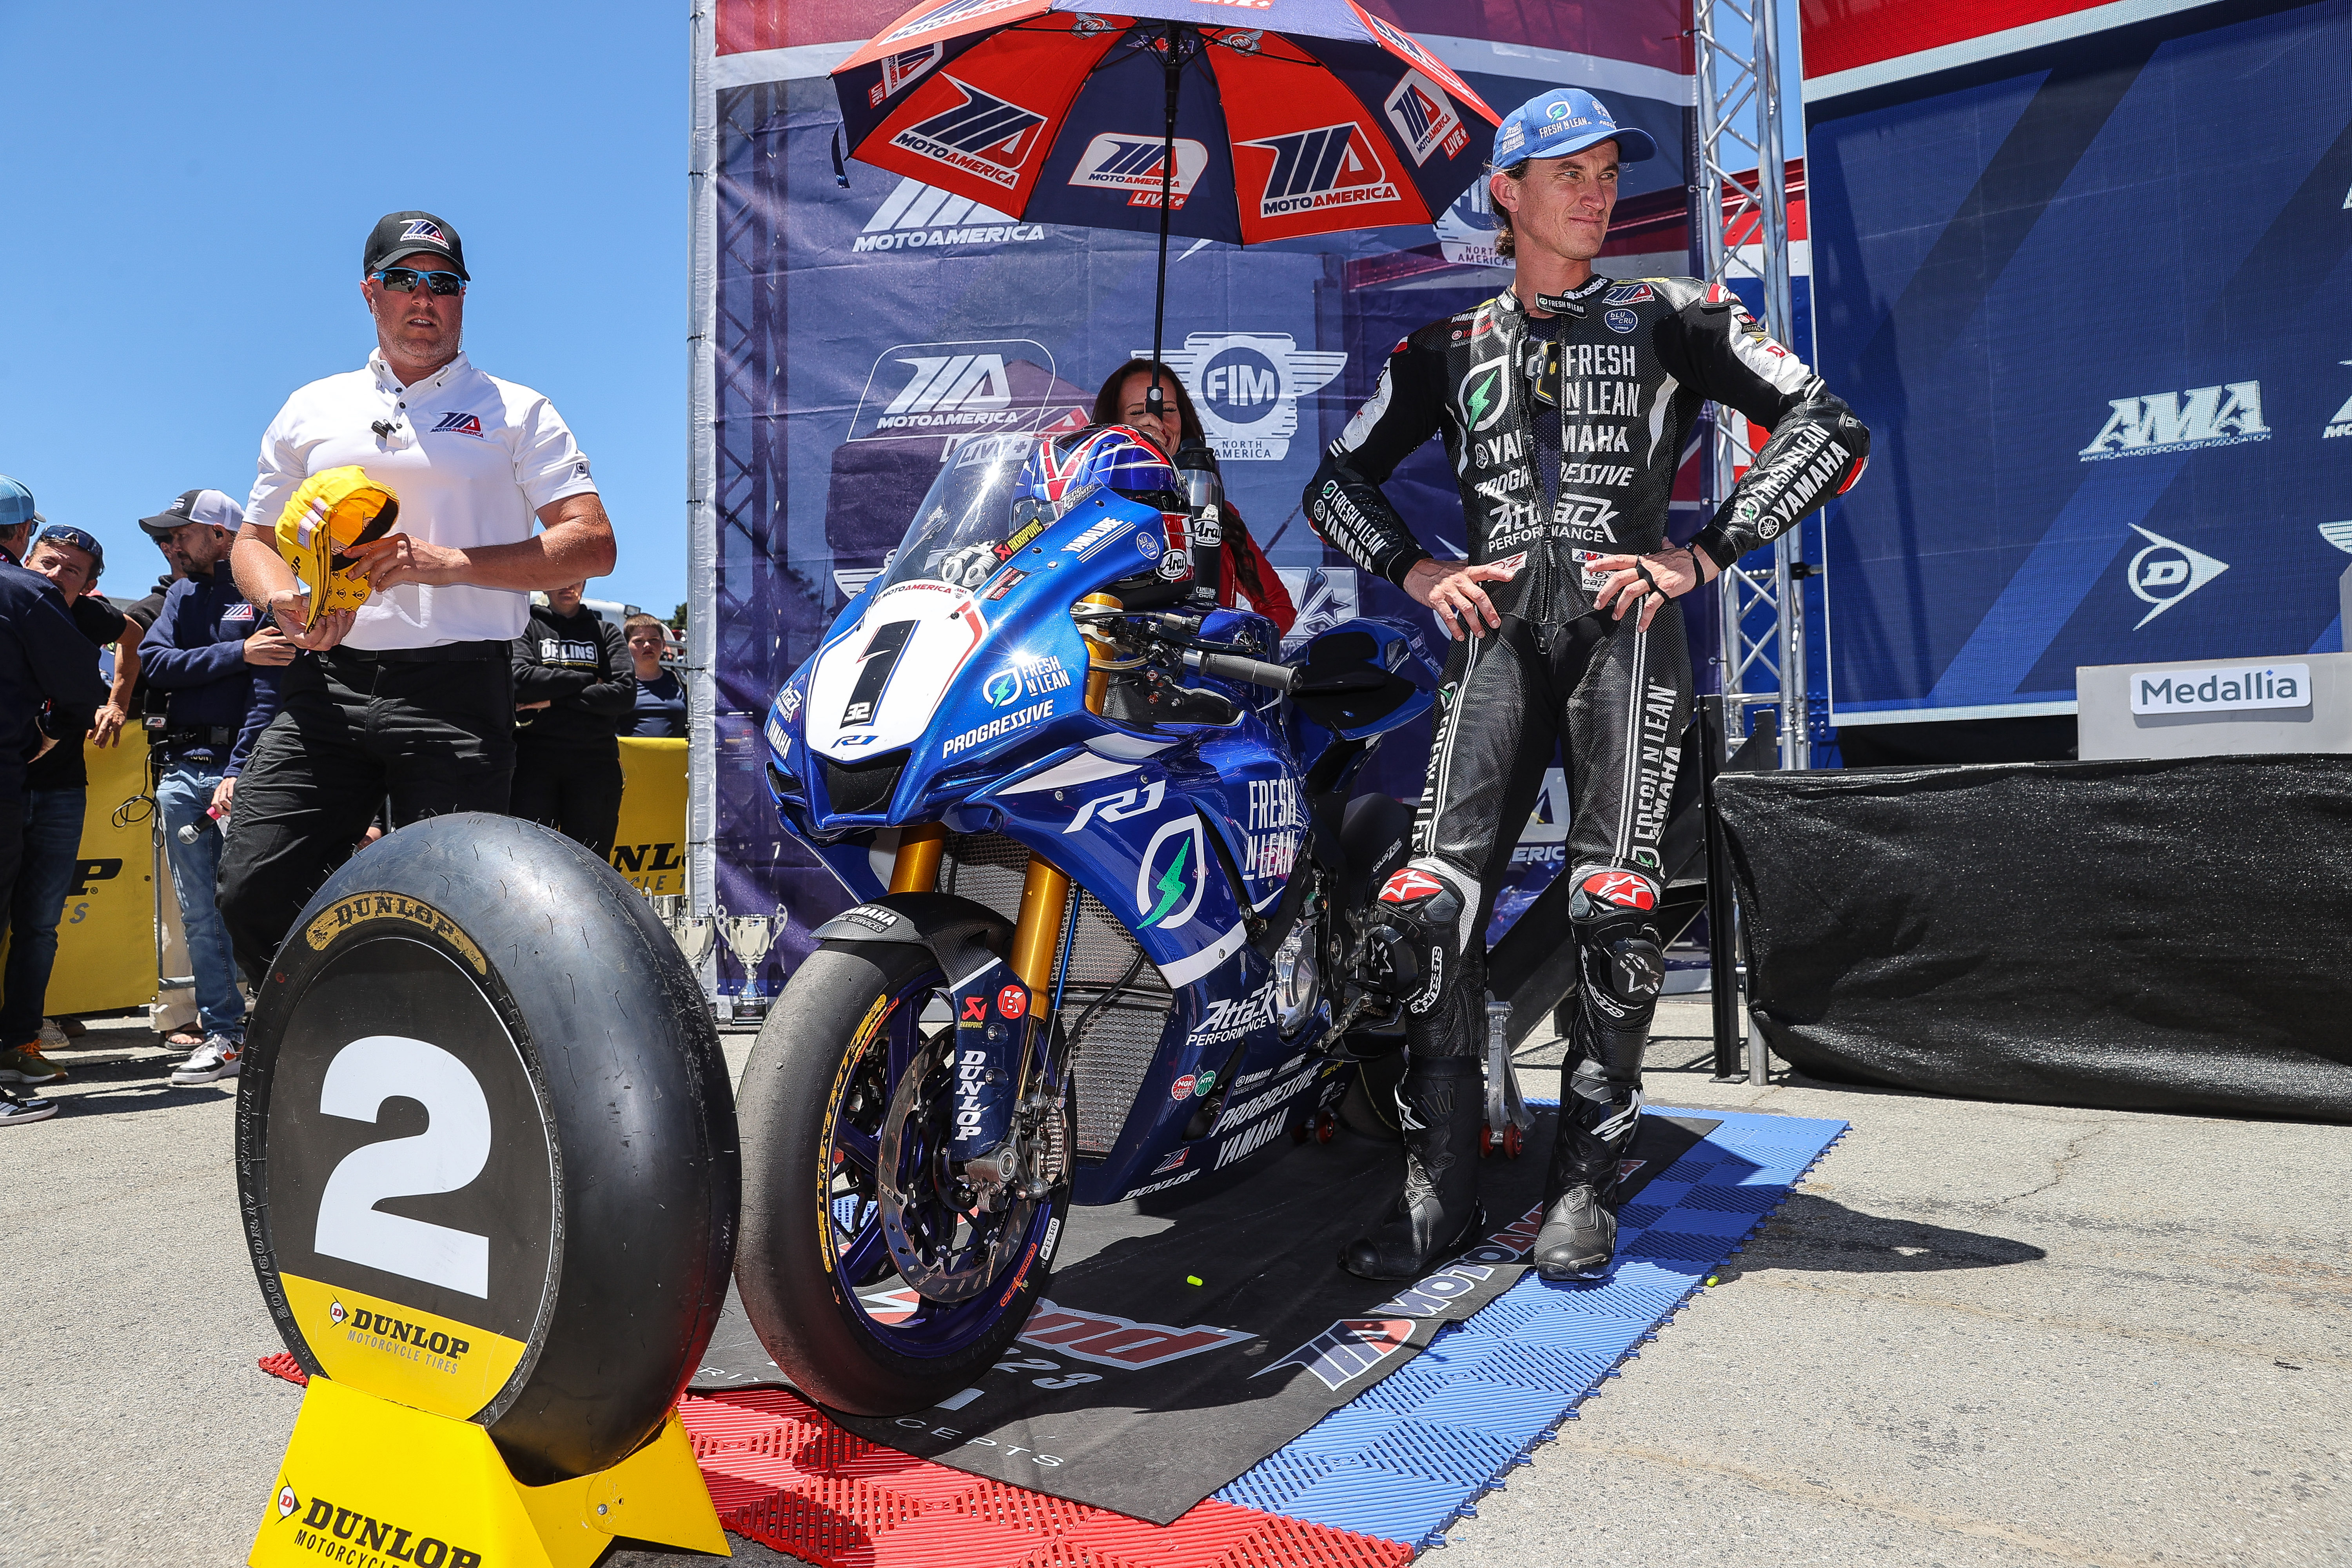 Gagne Scores Pair of Podiums in Sunday’s Superbike Doubleheader image